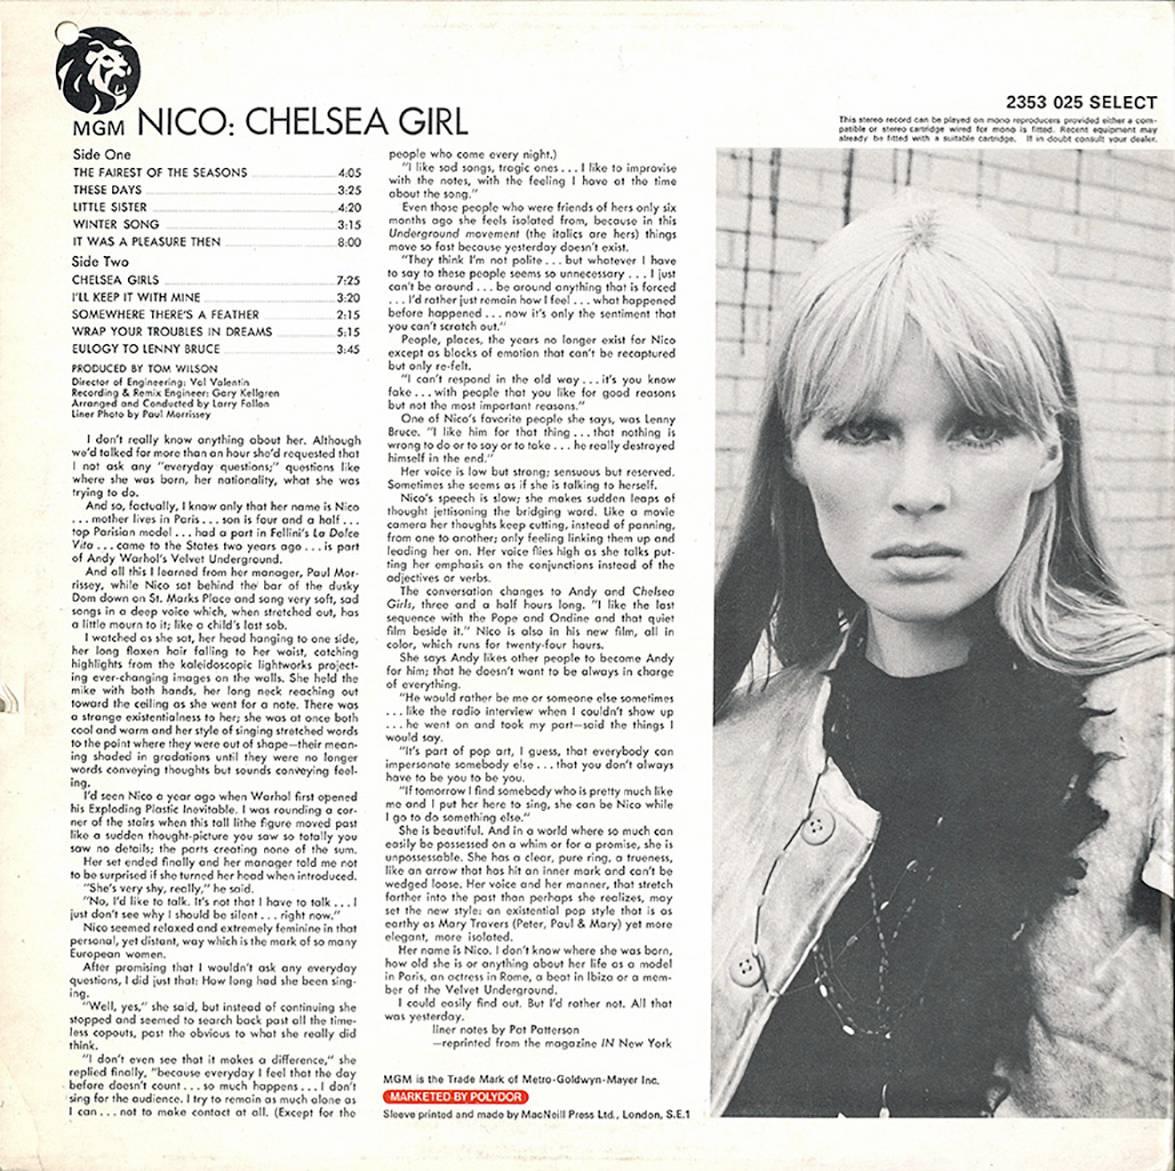 Nico, Chelsea Girl, original 1971 UK vinyl record. A stand-out vintage Warhol-related collectible well-suited fro framing. 

Dimensions: 12 x 12 inches.
In excellent overall condition for its age. Tiny hole punch on lower left from record label.